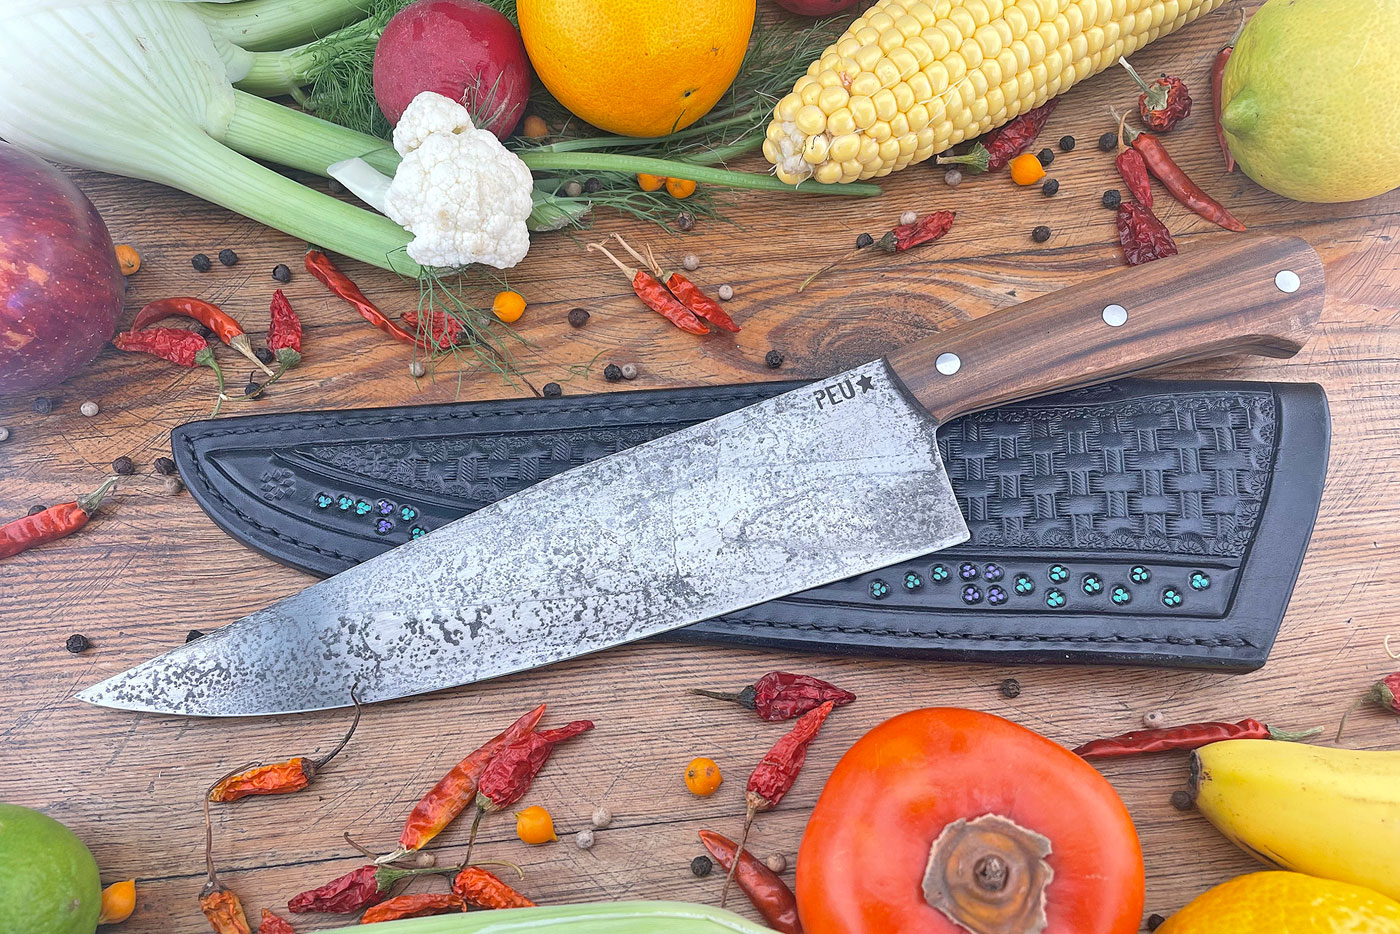 Chef's Knife (Cocinero 230mm) with Lapacho and O2 Carbon Steel